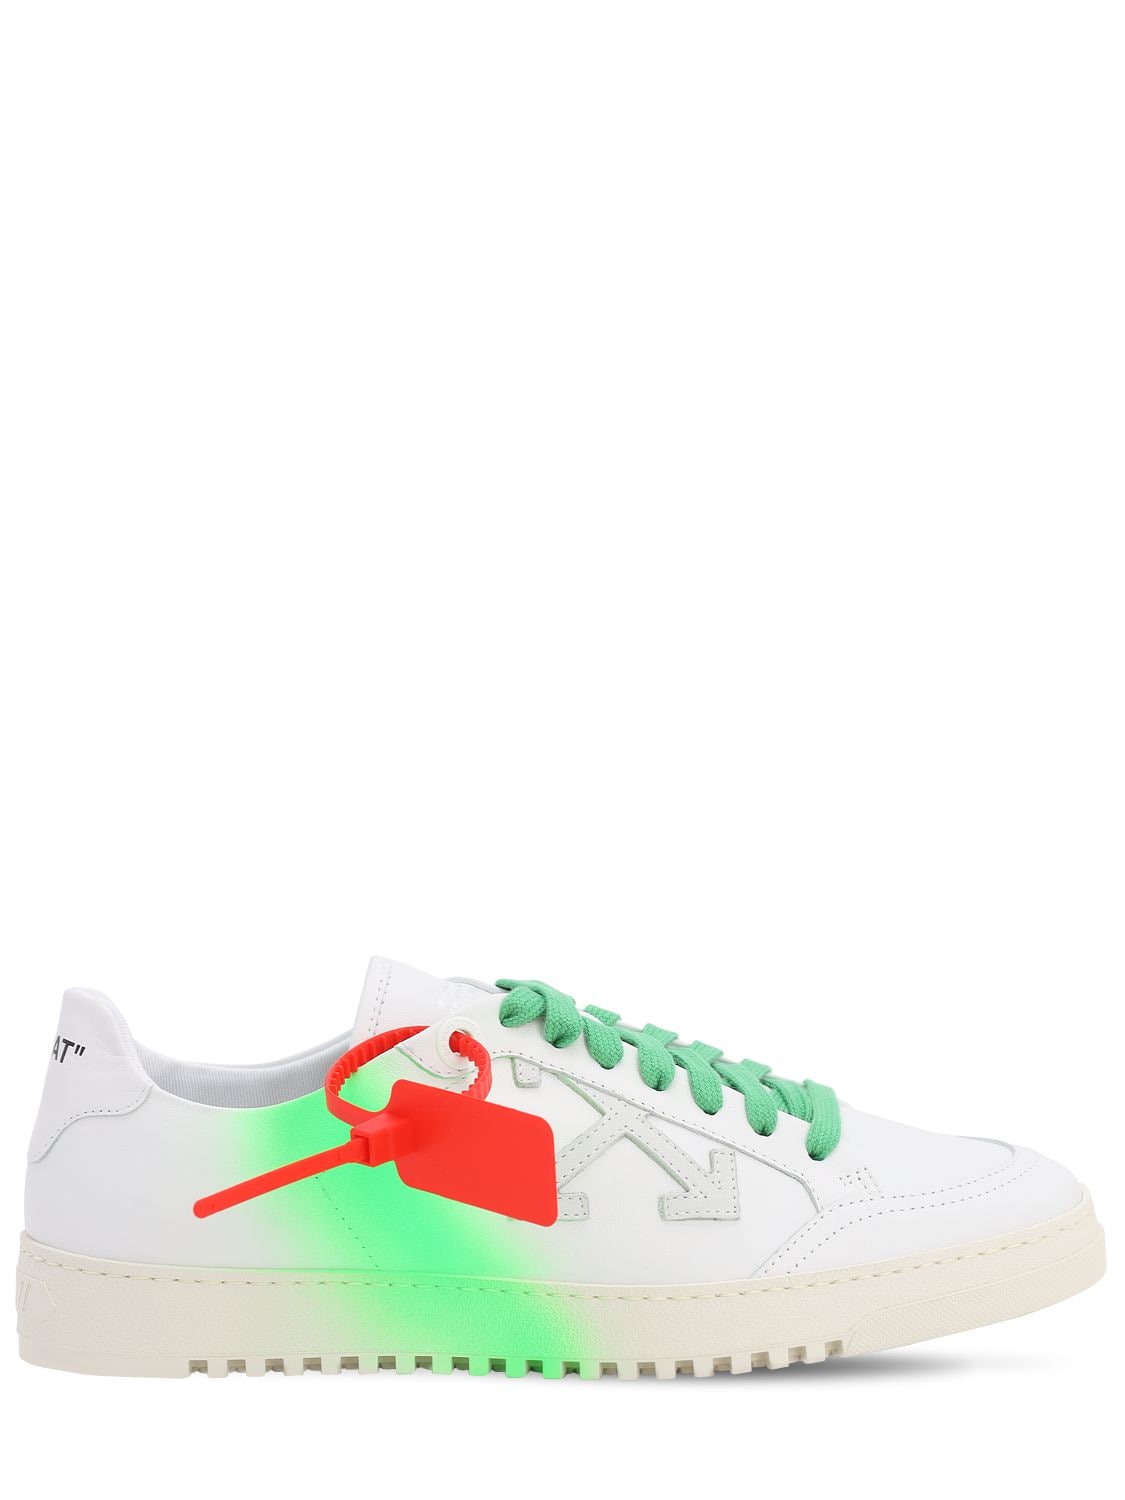 off white leather paint